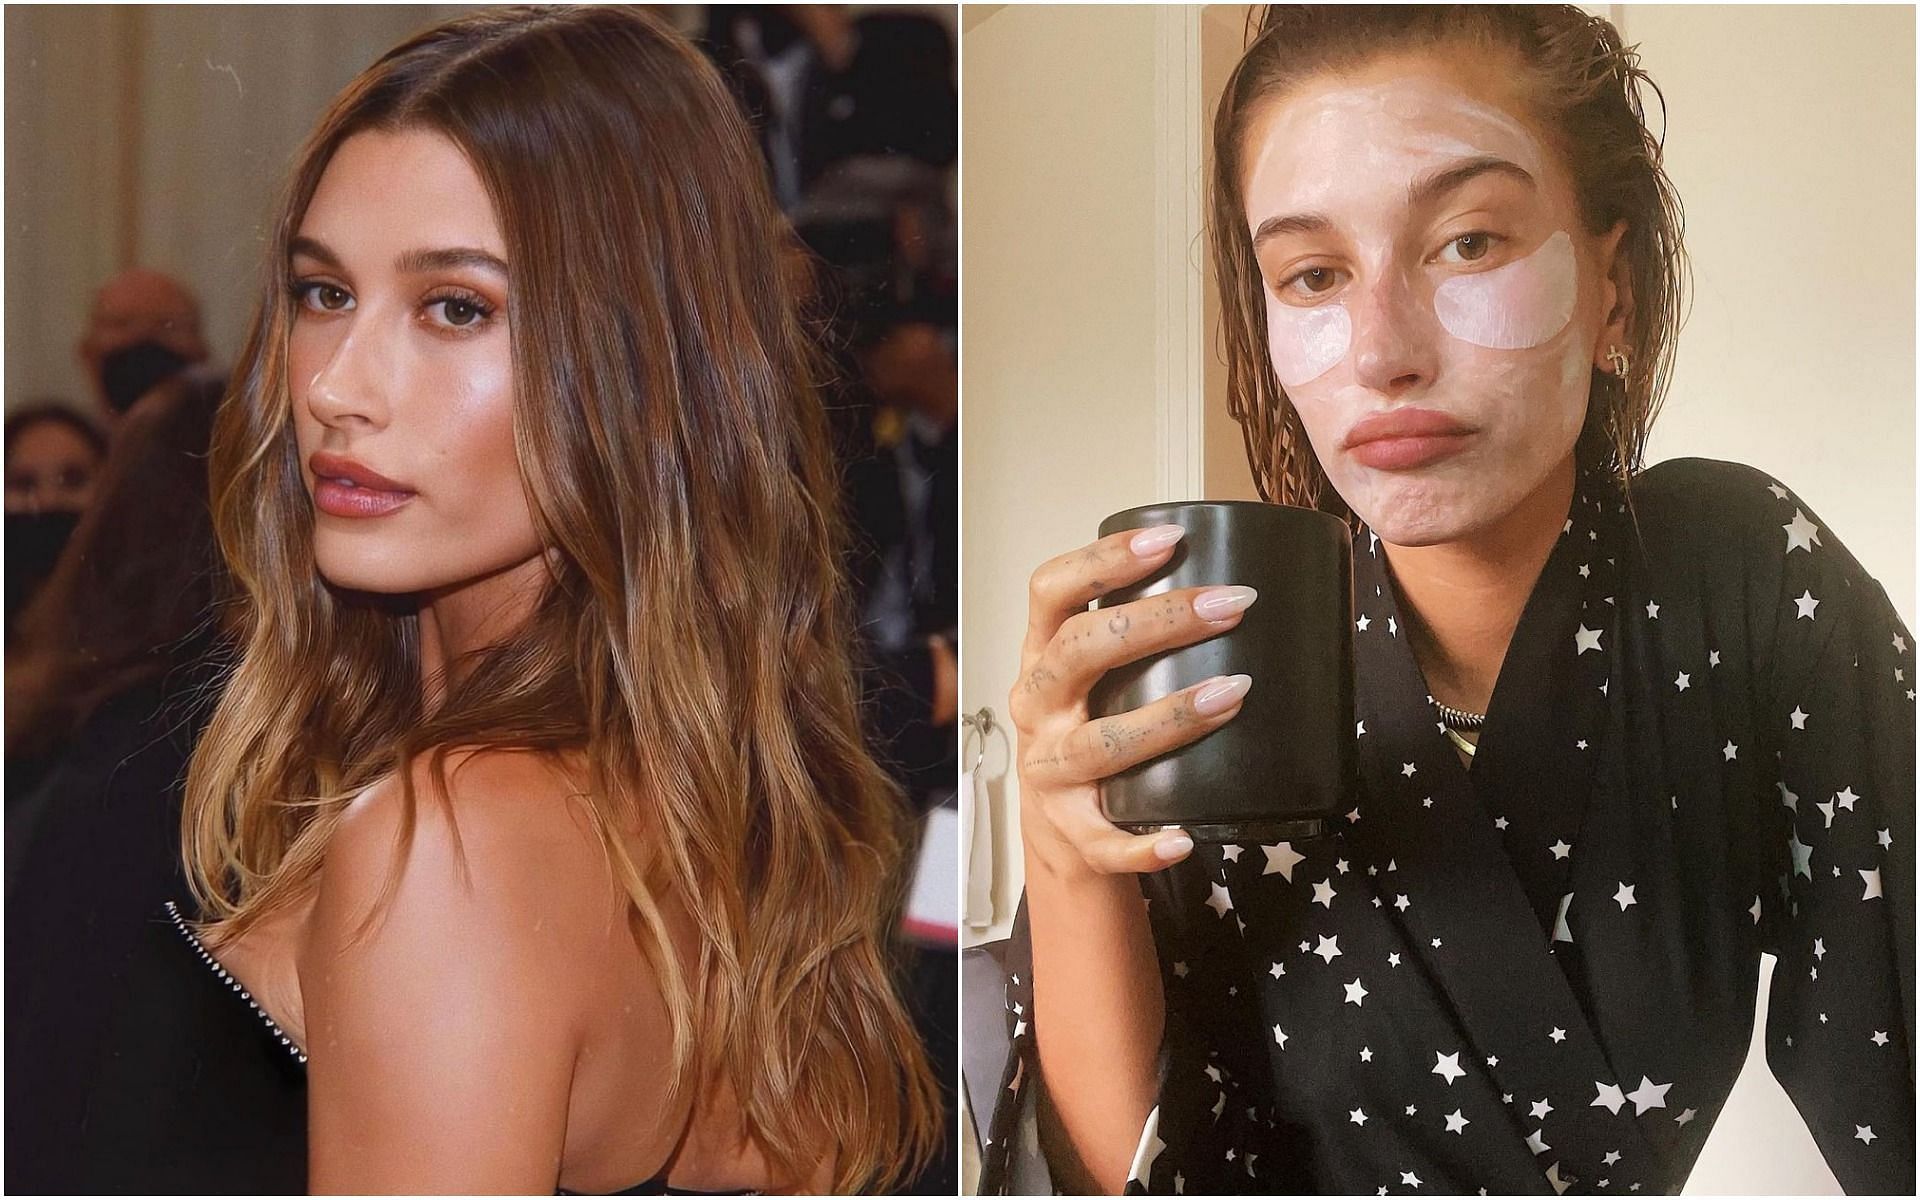 Hailey Bieber is famous for her obsession with skincare (Image via Instagram/haileybieber)